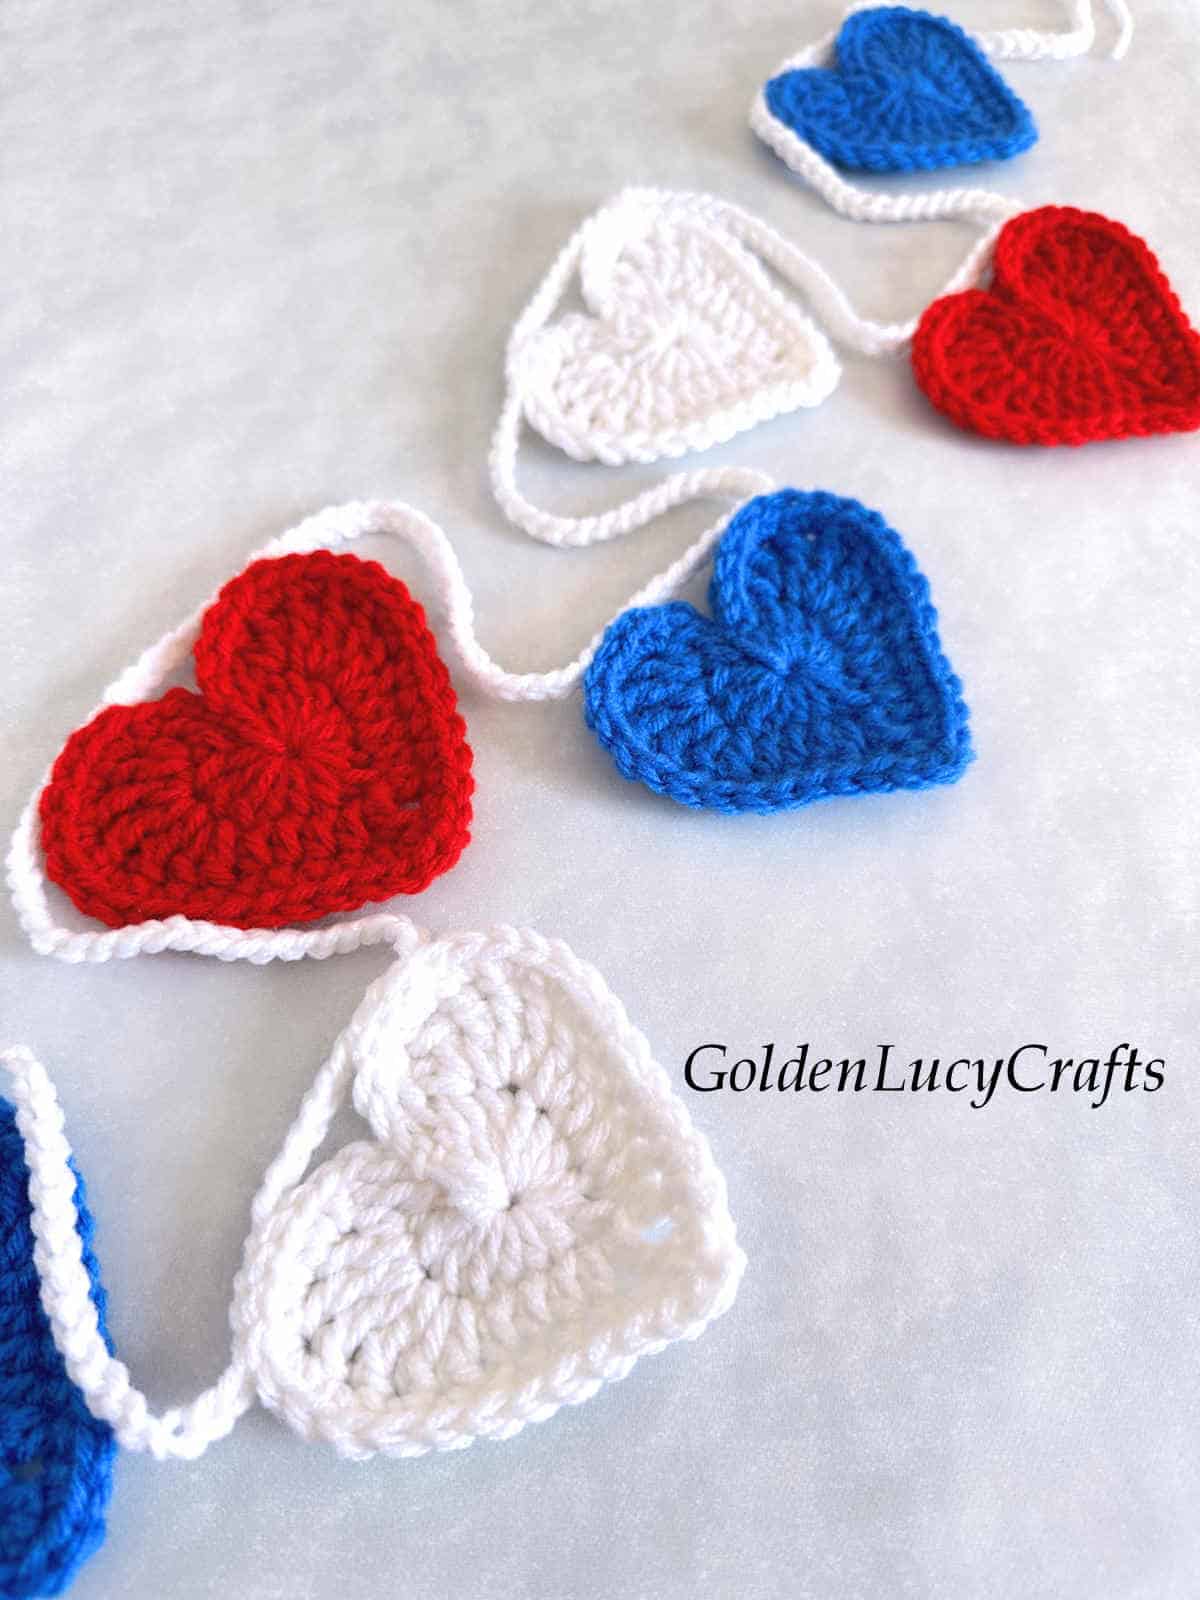 Crochet fourth of July heart garland close up picture.